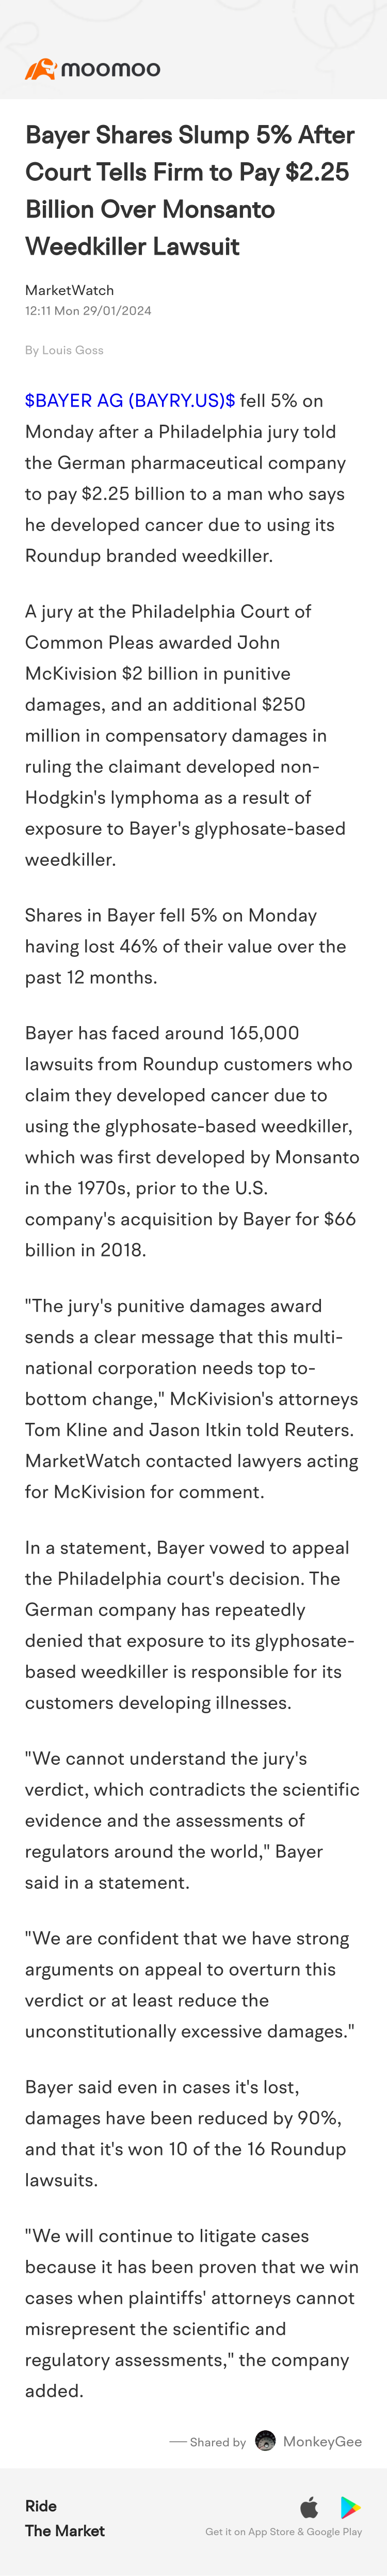 Next lawsuit should be on GMO